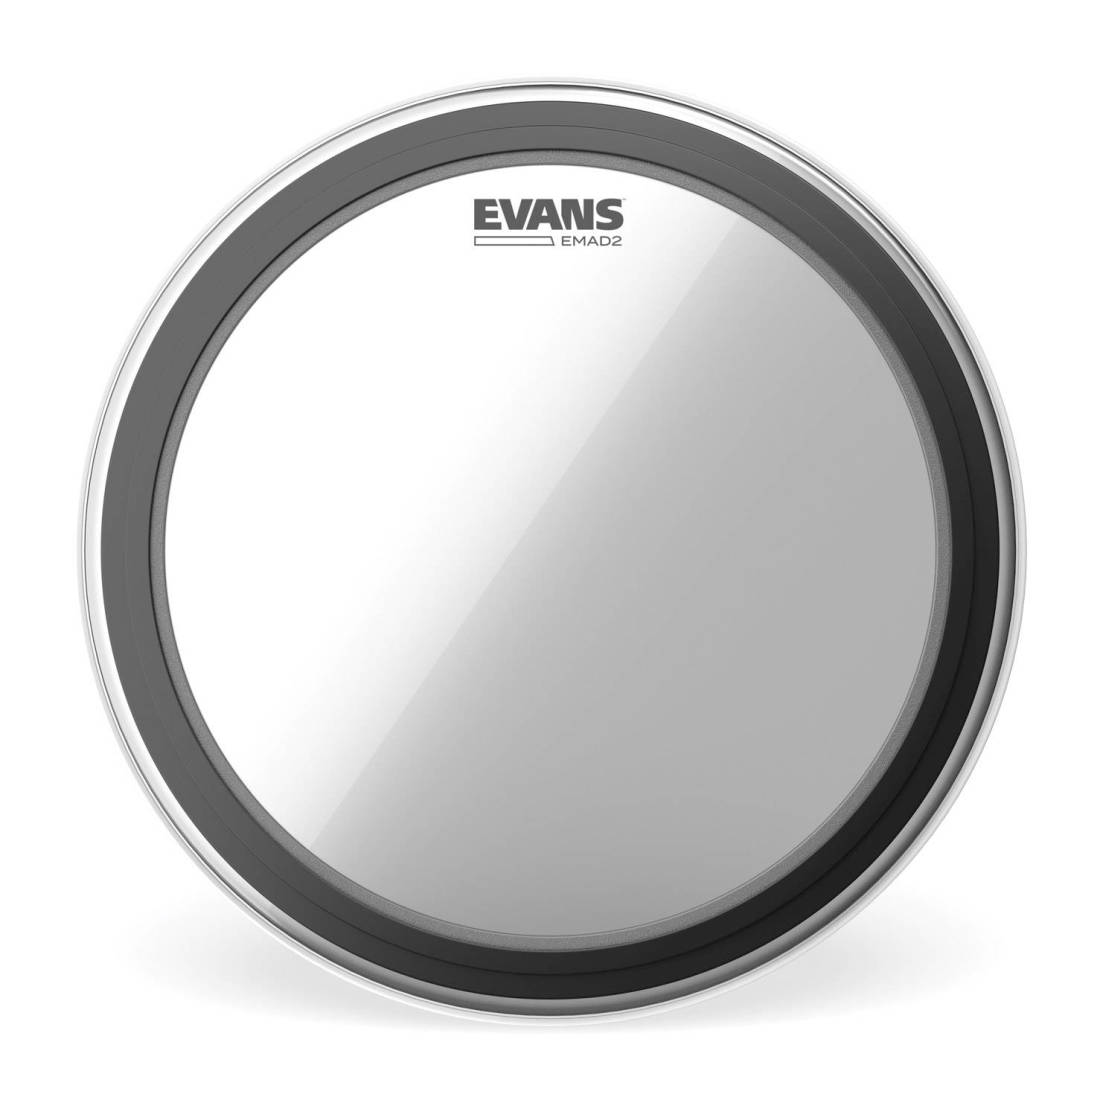 BD26EMAD2 - Evans EMAD2 Clear Bass Drum Head, 26 Inch